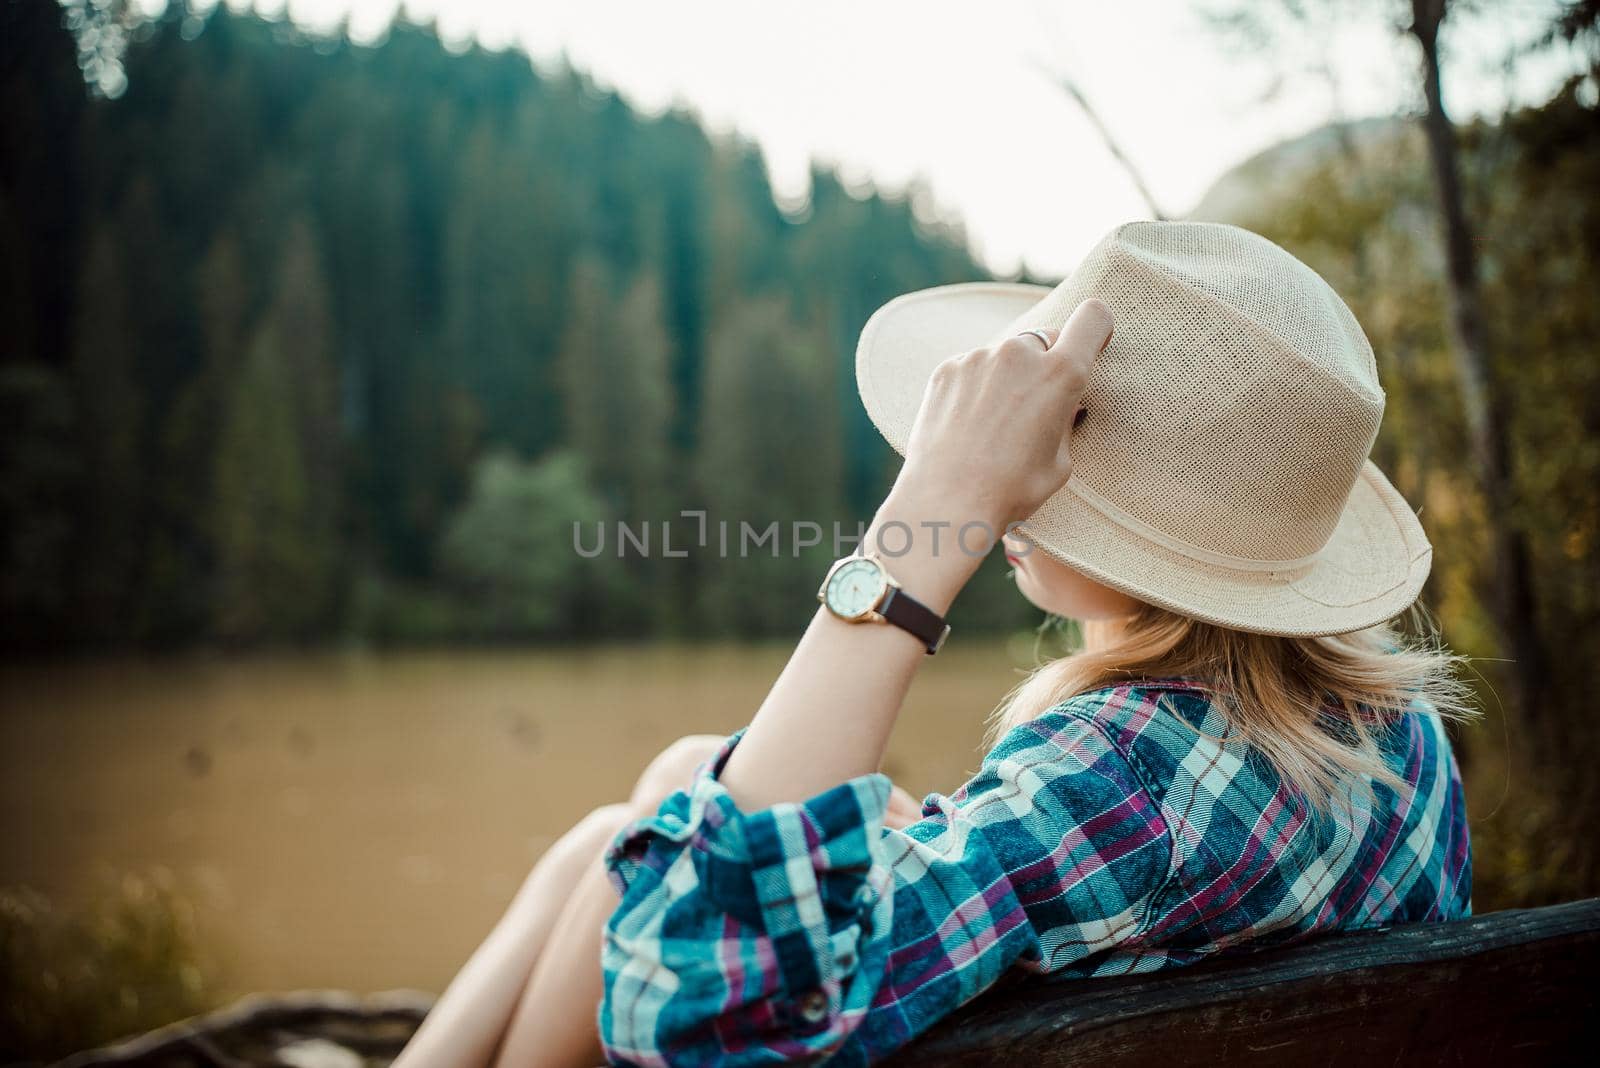 Rear view of a young woman in a denim shirt and hat, sitting on a bench, admires the lake landscape, the pine forest and the relief of the mountains in the background